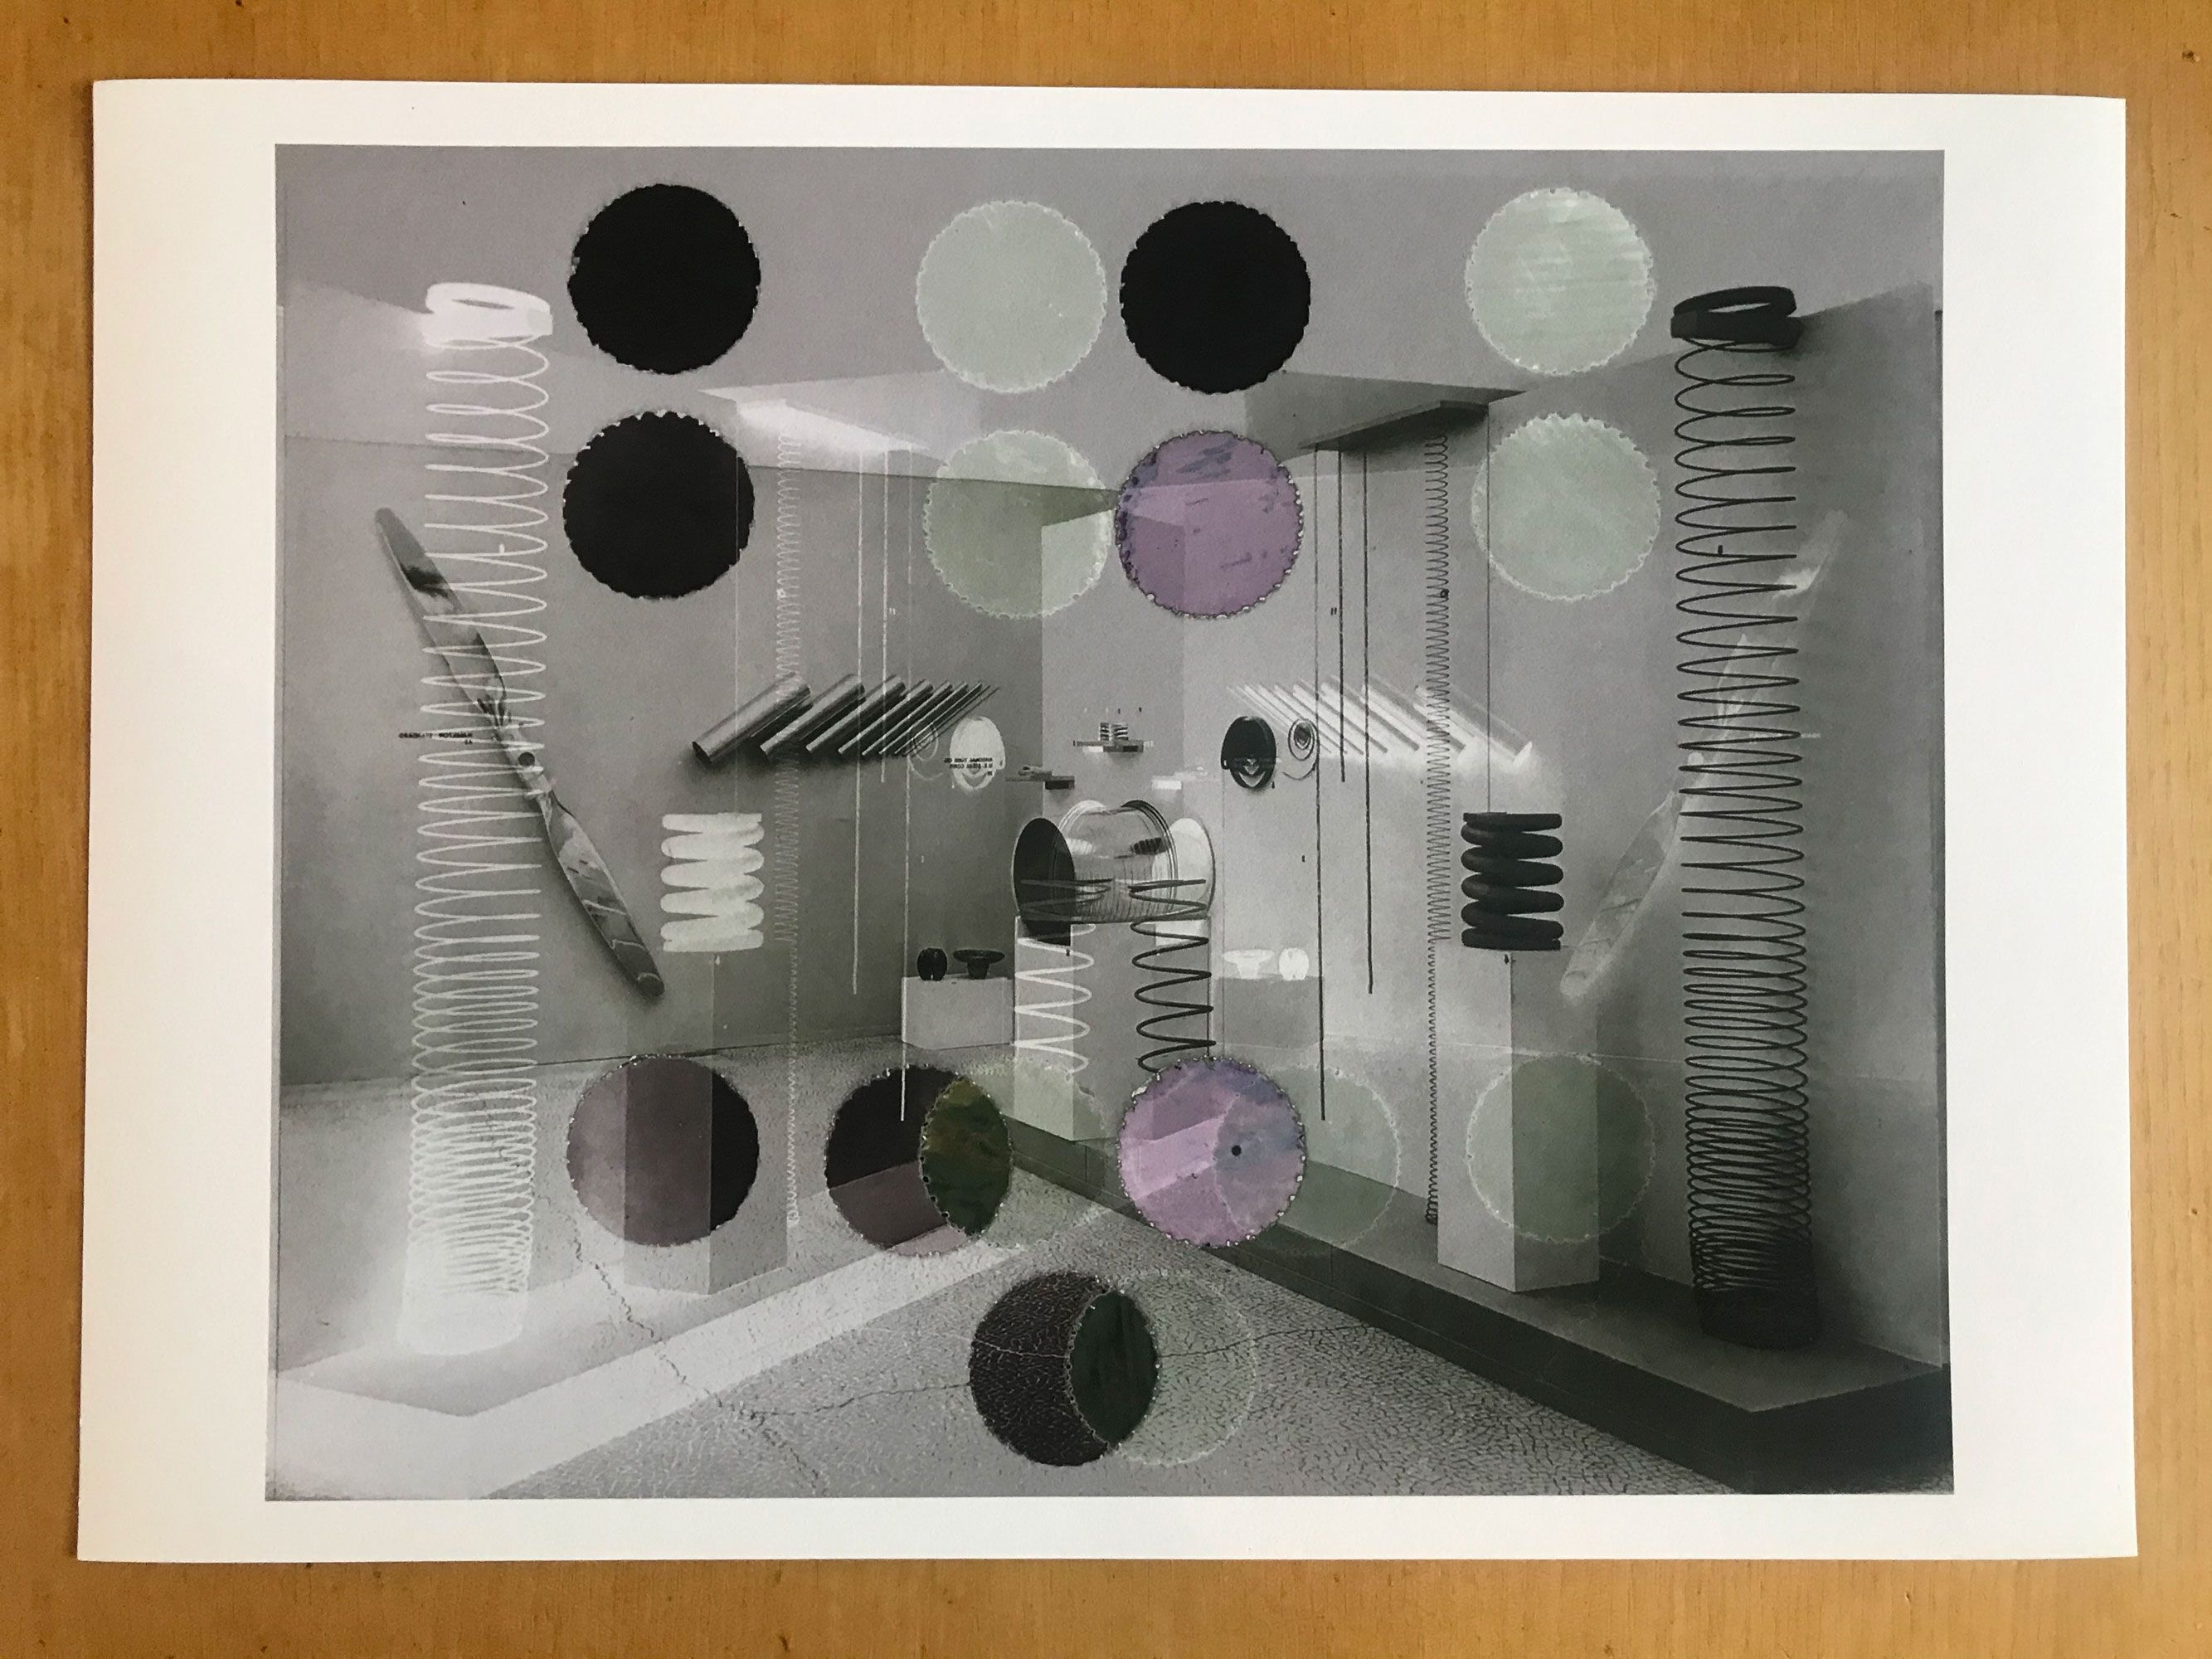 A print on a table. The image on the print is a back and white abstract including plinths and springs overlaid with black, white and pale lilac circles.